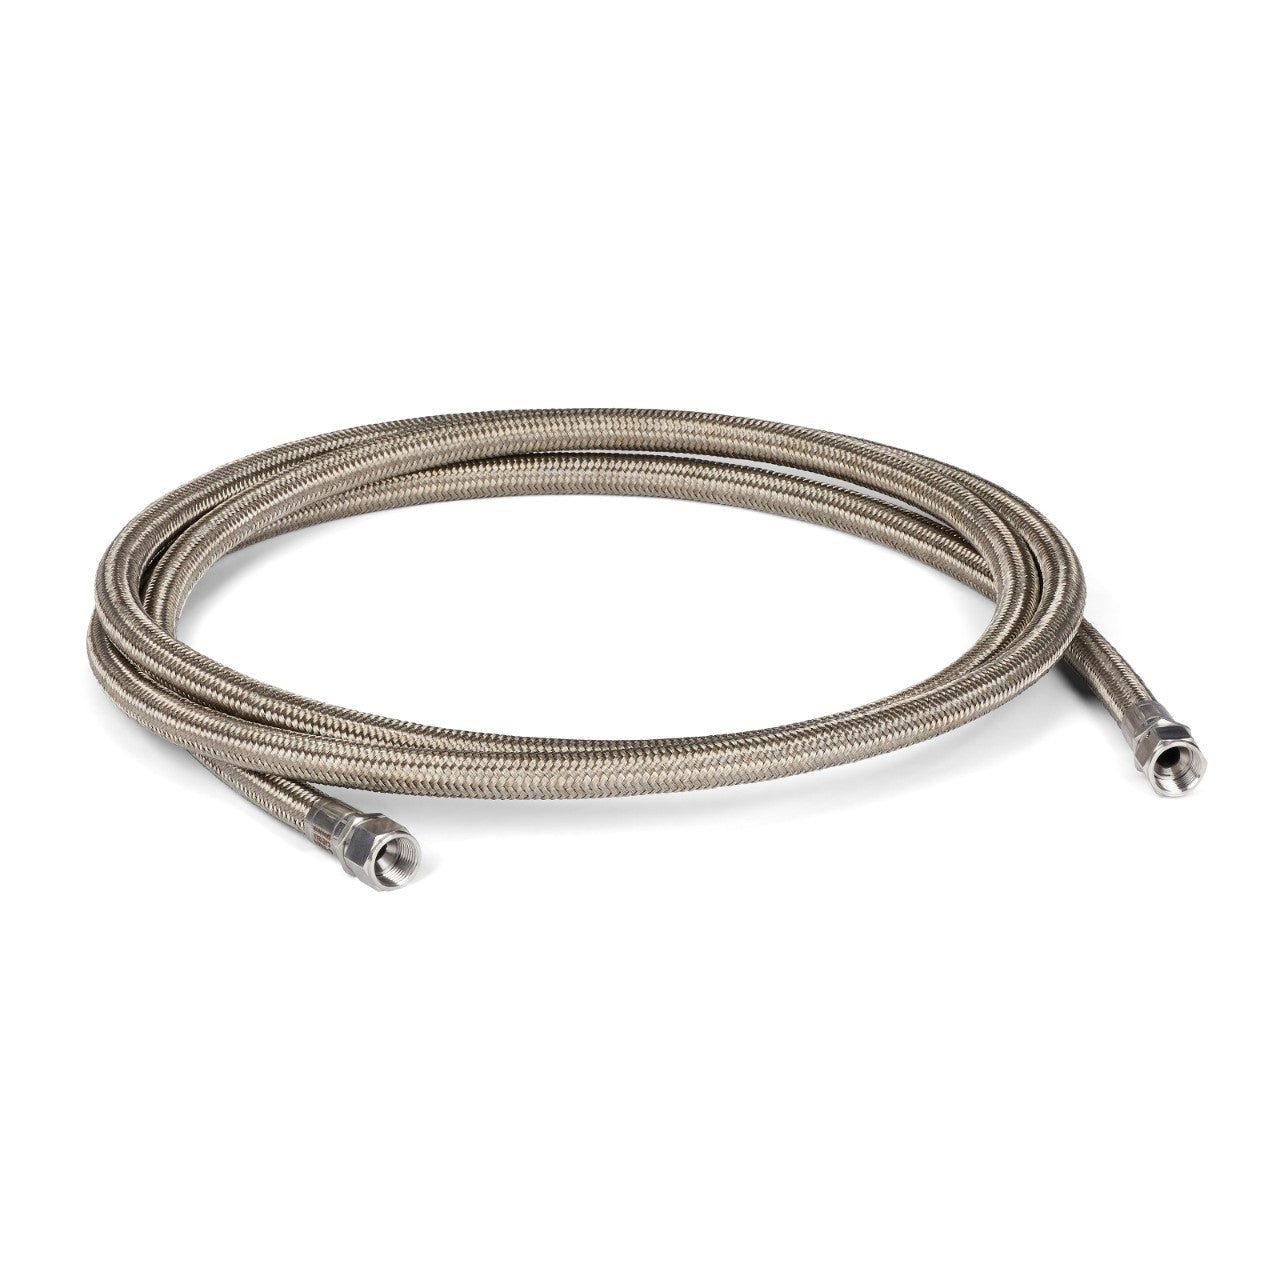 10 ft. (3.0 M) Stainless Steel Braided PTFE Ambient Hose,  No. 8 (0.401 in. / 10.2 mm ID)